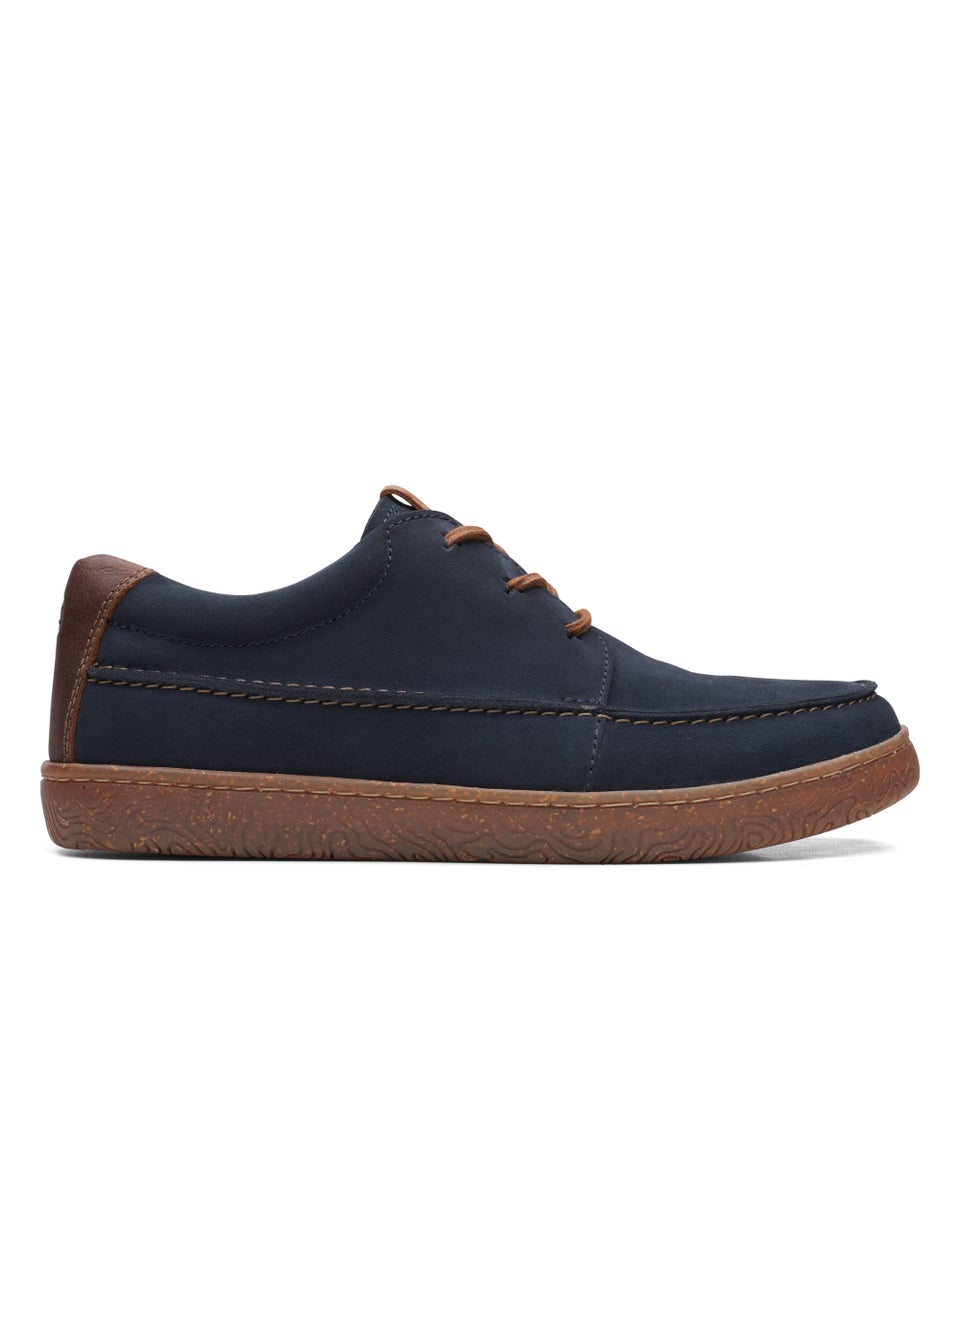 Clarks Navy Hodson Suede Moccasin Shoes - Matalan